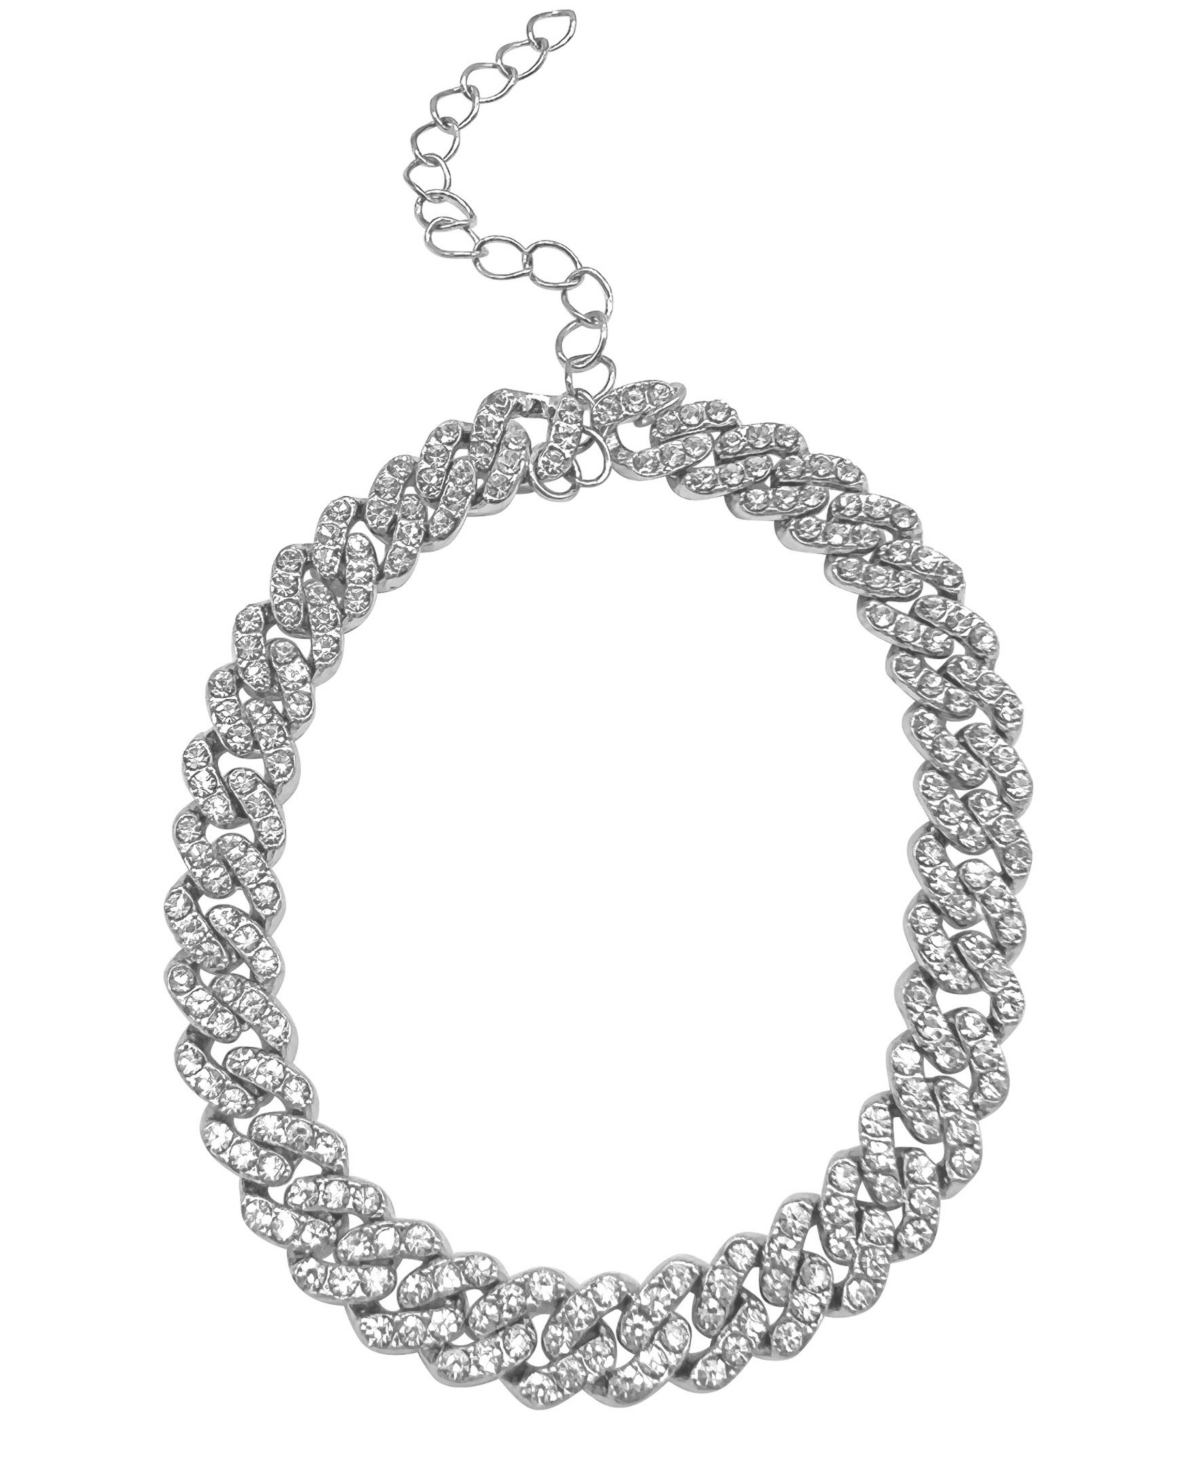 Adornia Silver Plated Edgy Pave Cuban Chain